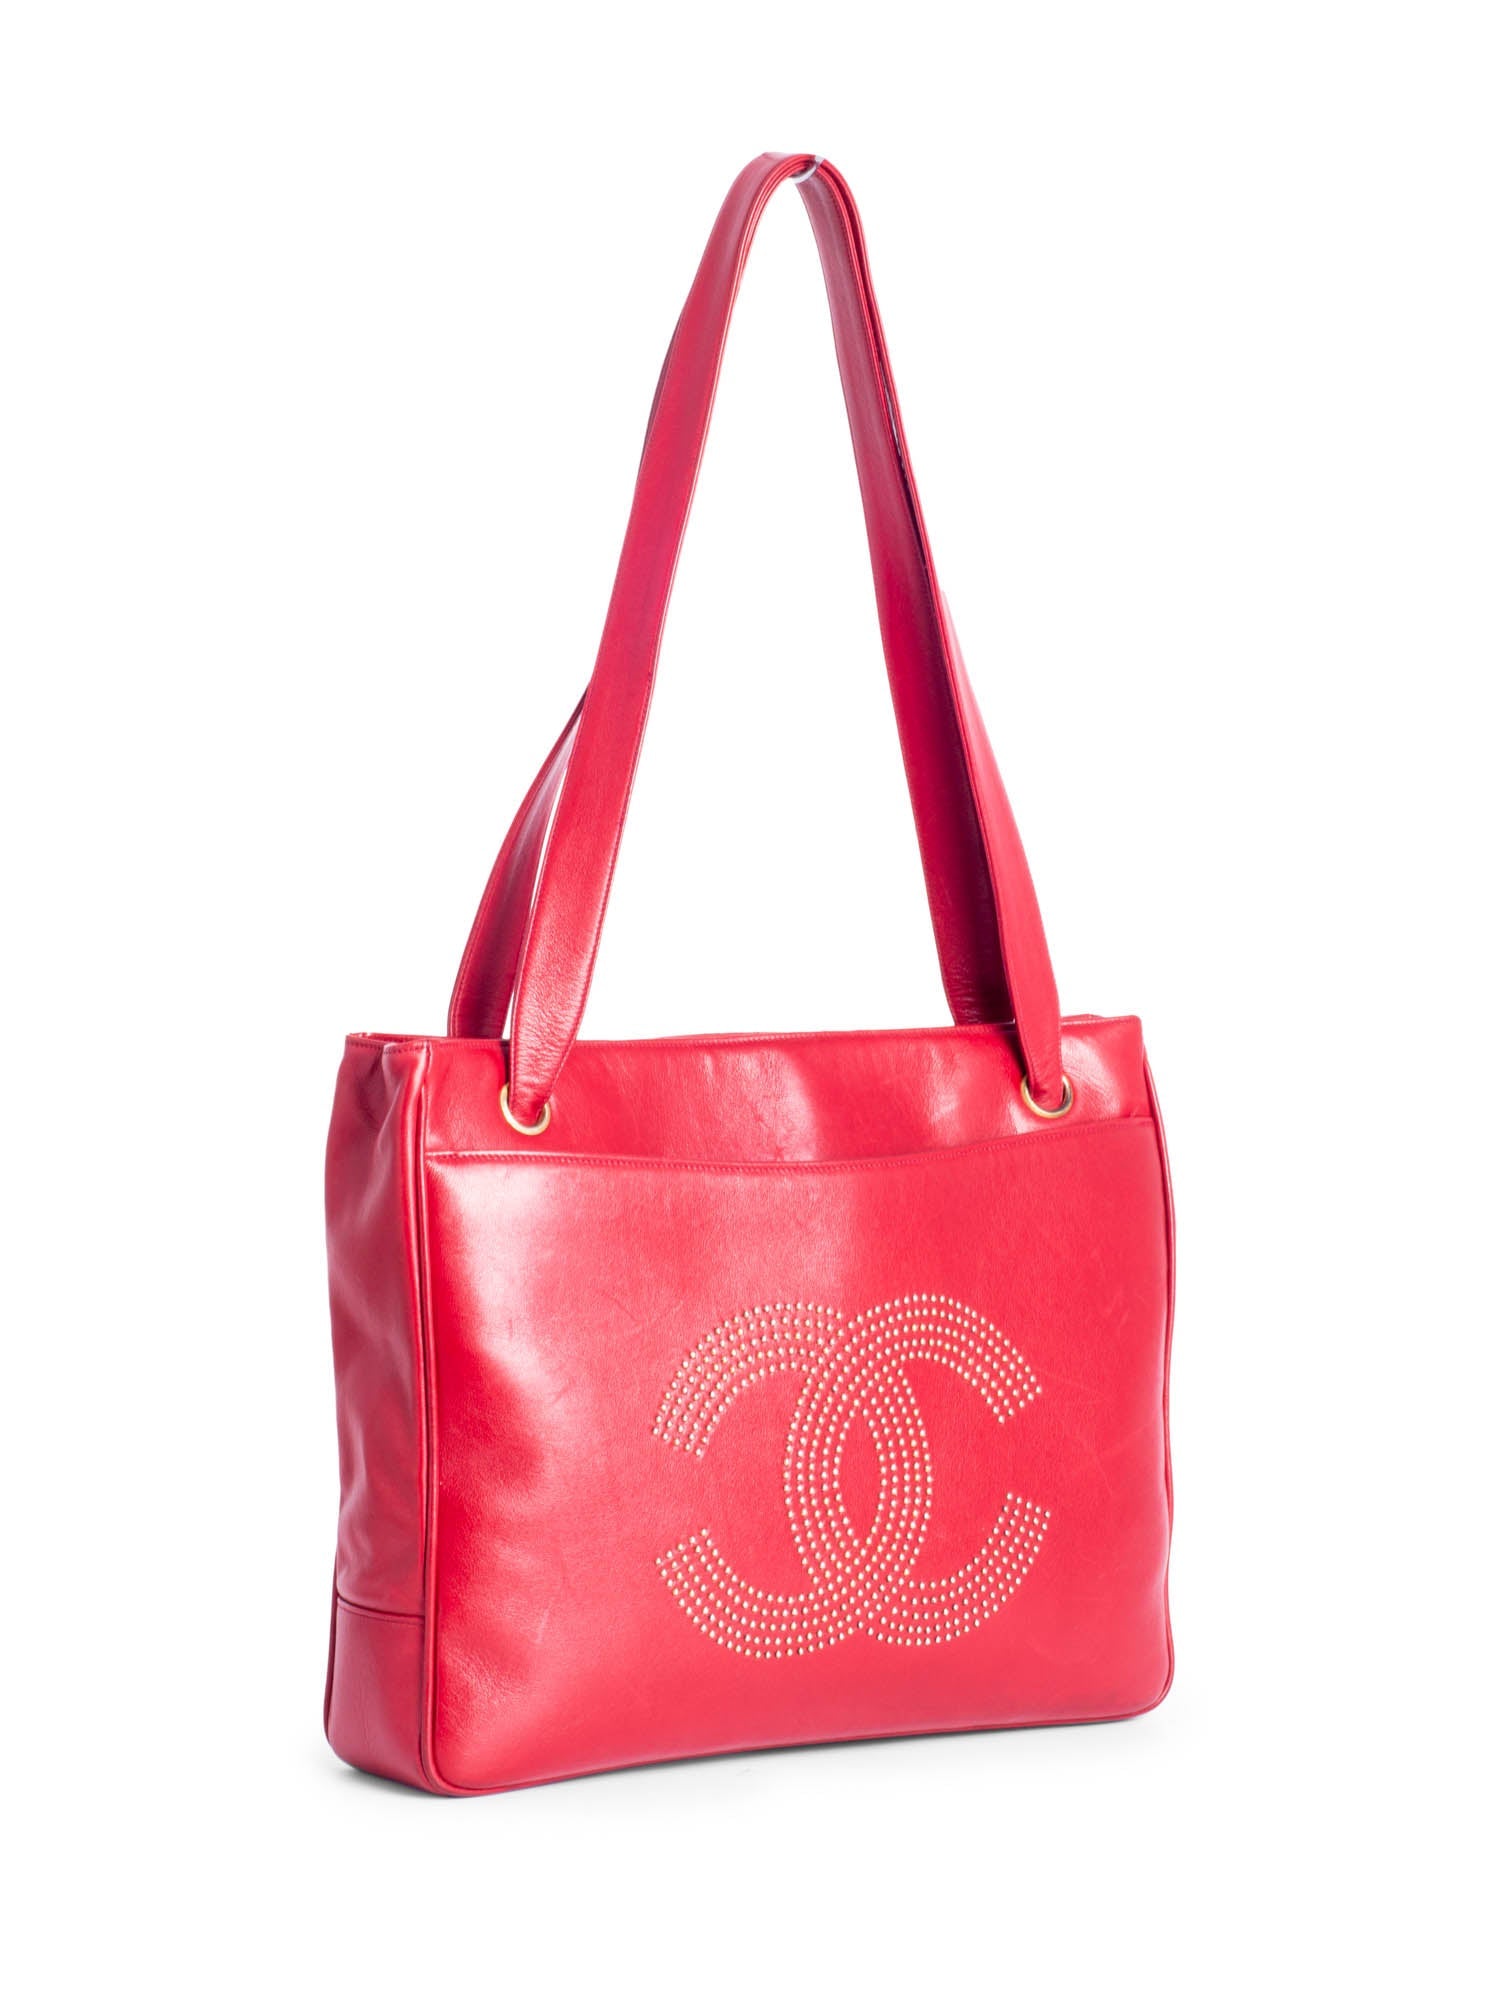 Chanel Pink Canvas and Leather Large Deauville Shopper Tote Chanel  TLC